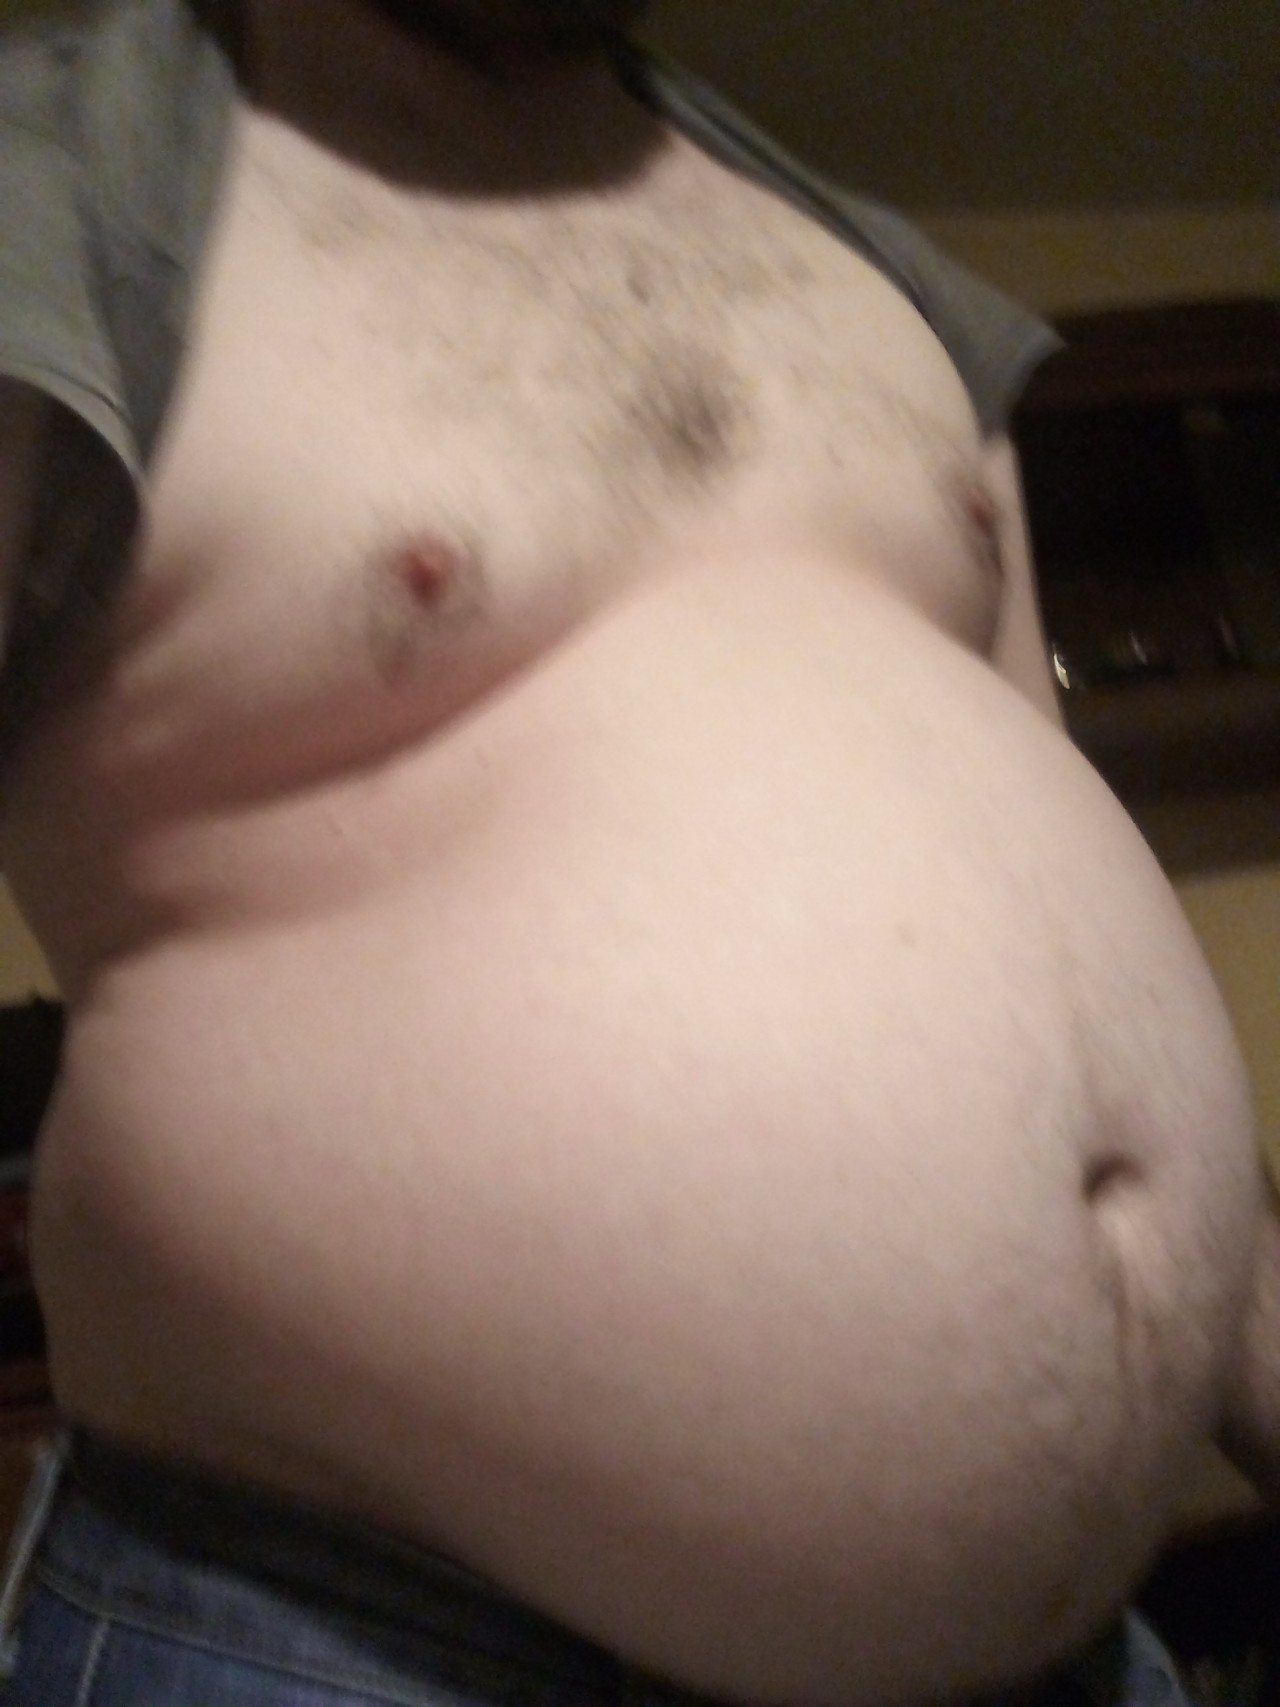 pablogainer:Fatten me up more!